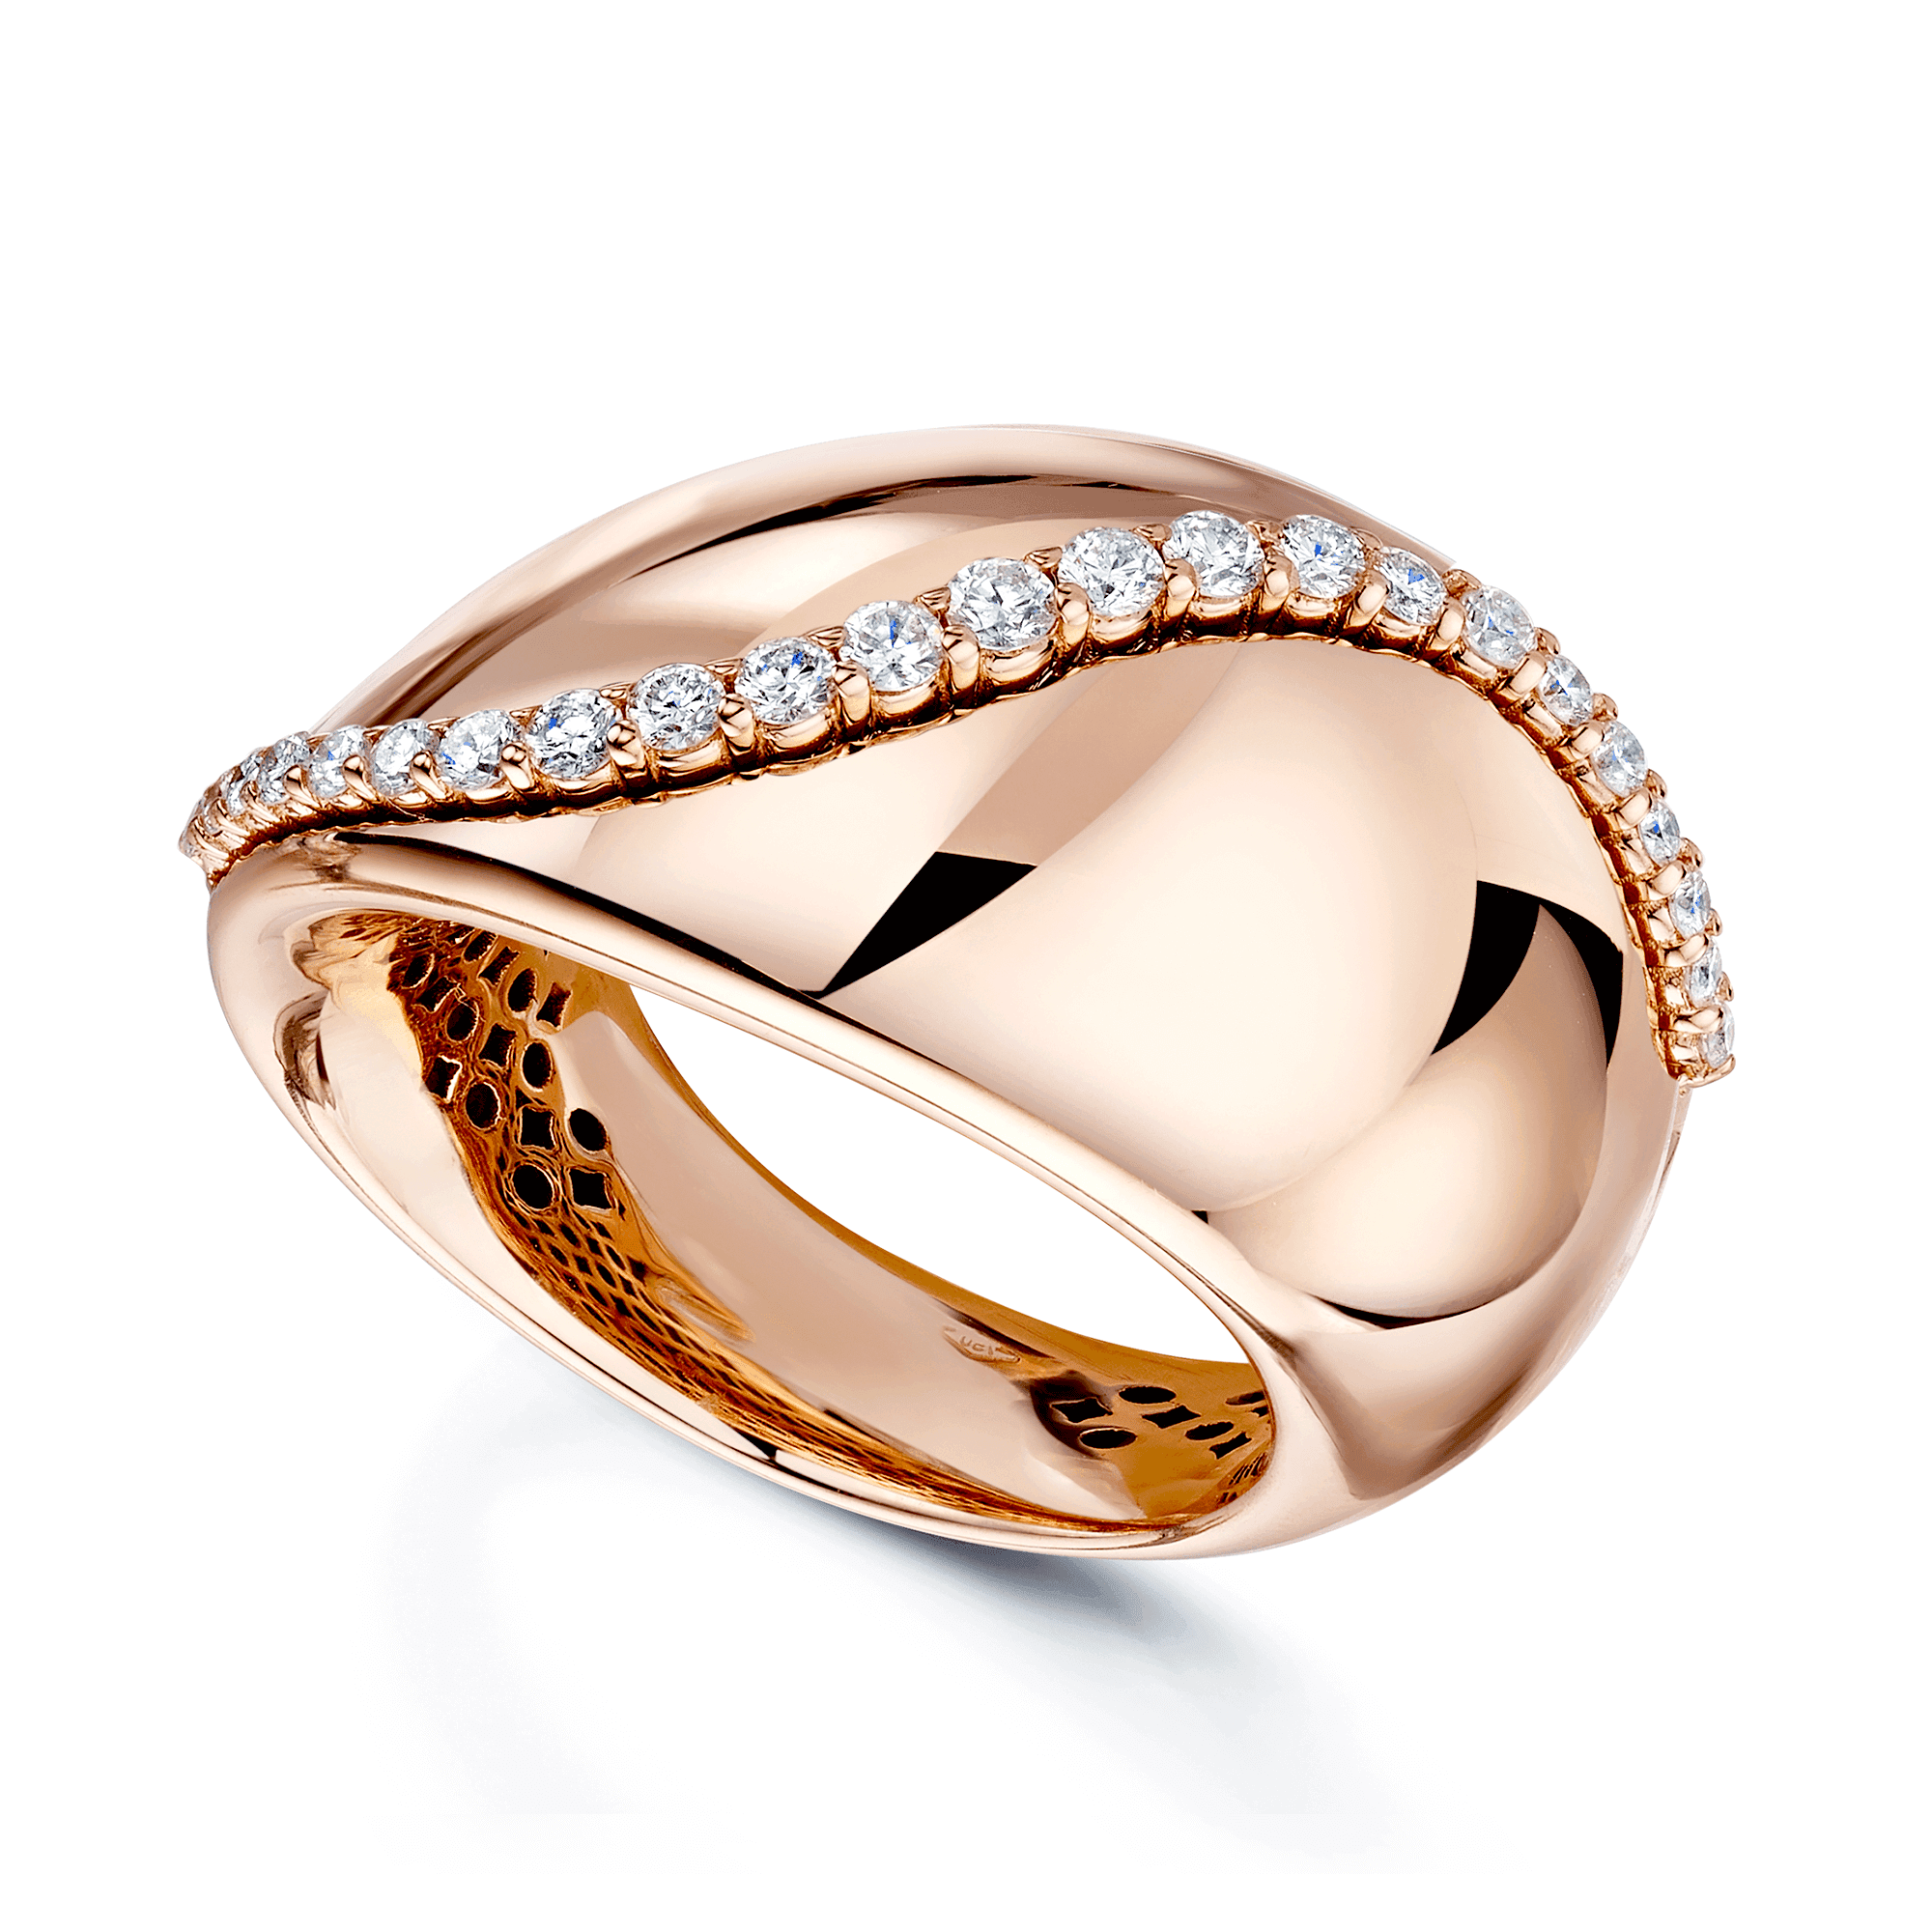 18ct Rose Gold Polished Domed Irregular Ring With Raised Diamond Detail.